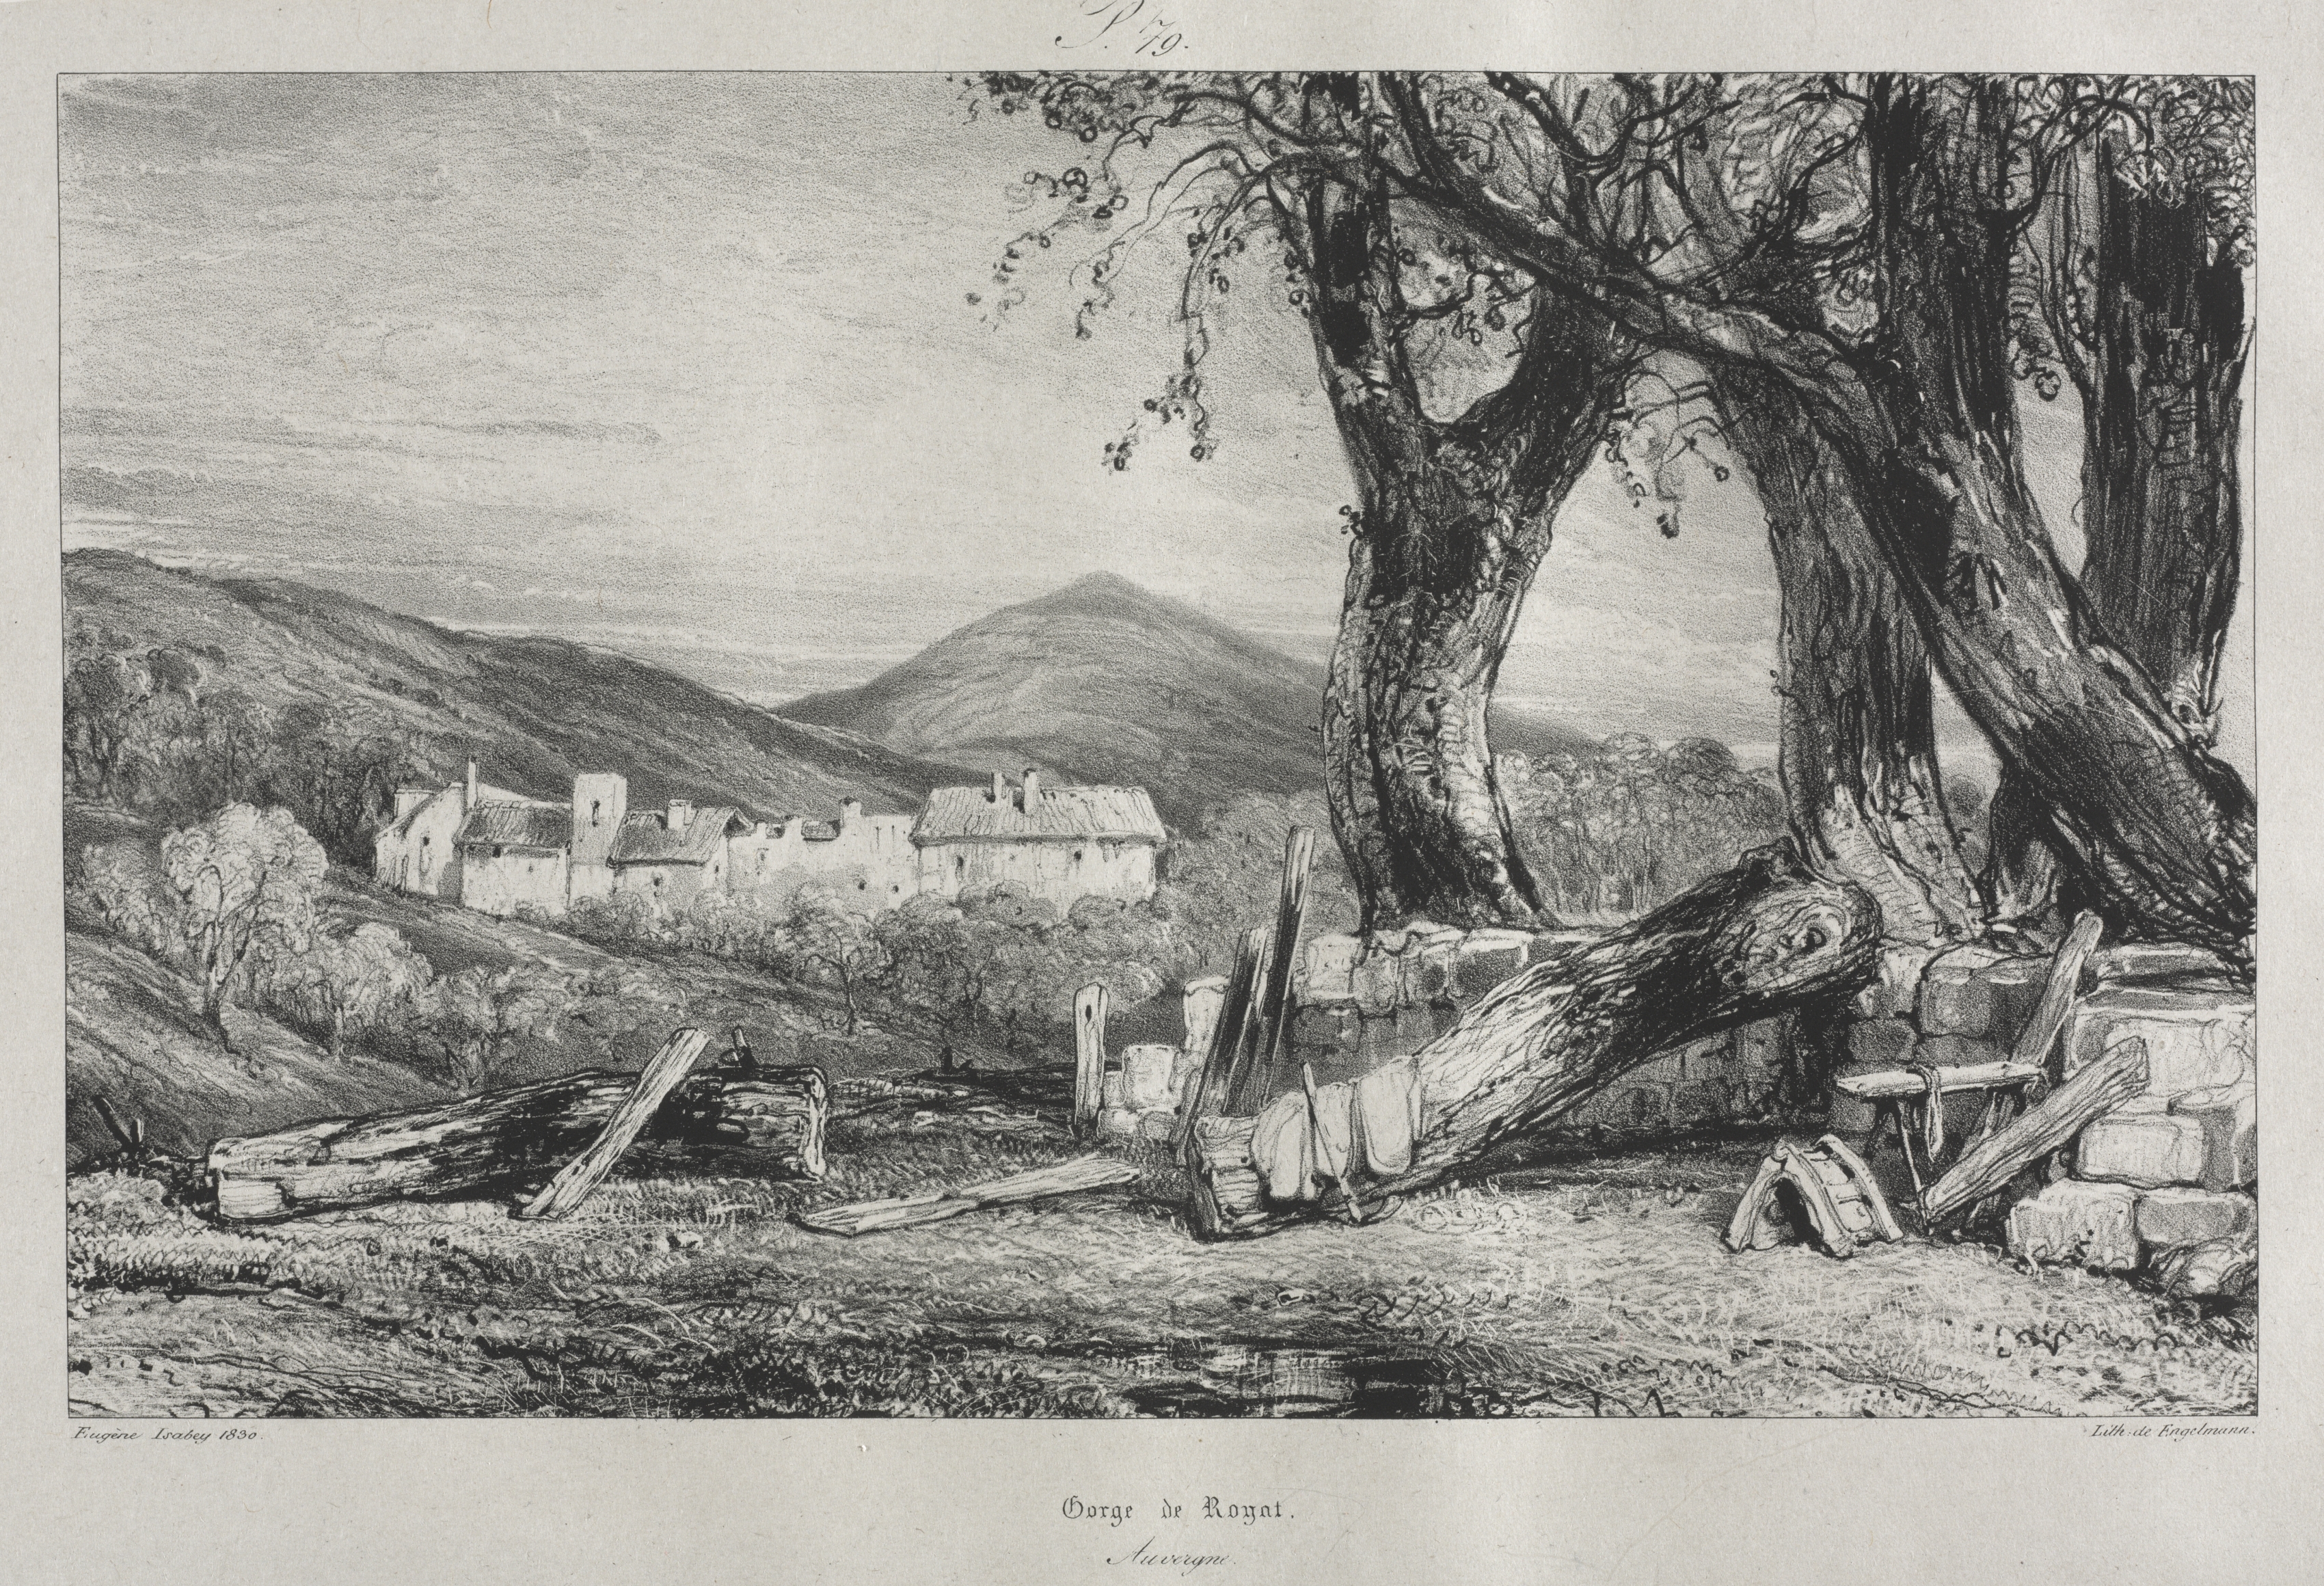 Picturesque and Romantic Journeys in Old France: Auvergne (vol. II), Gorge of Royat, Plate 79 